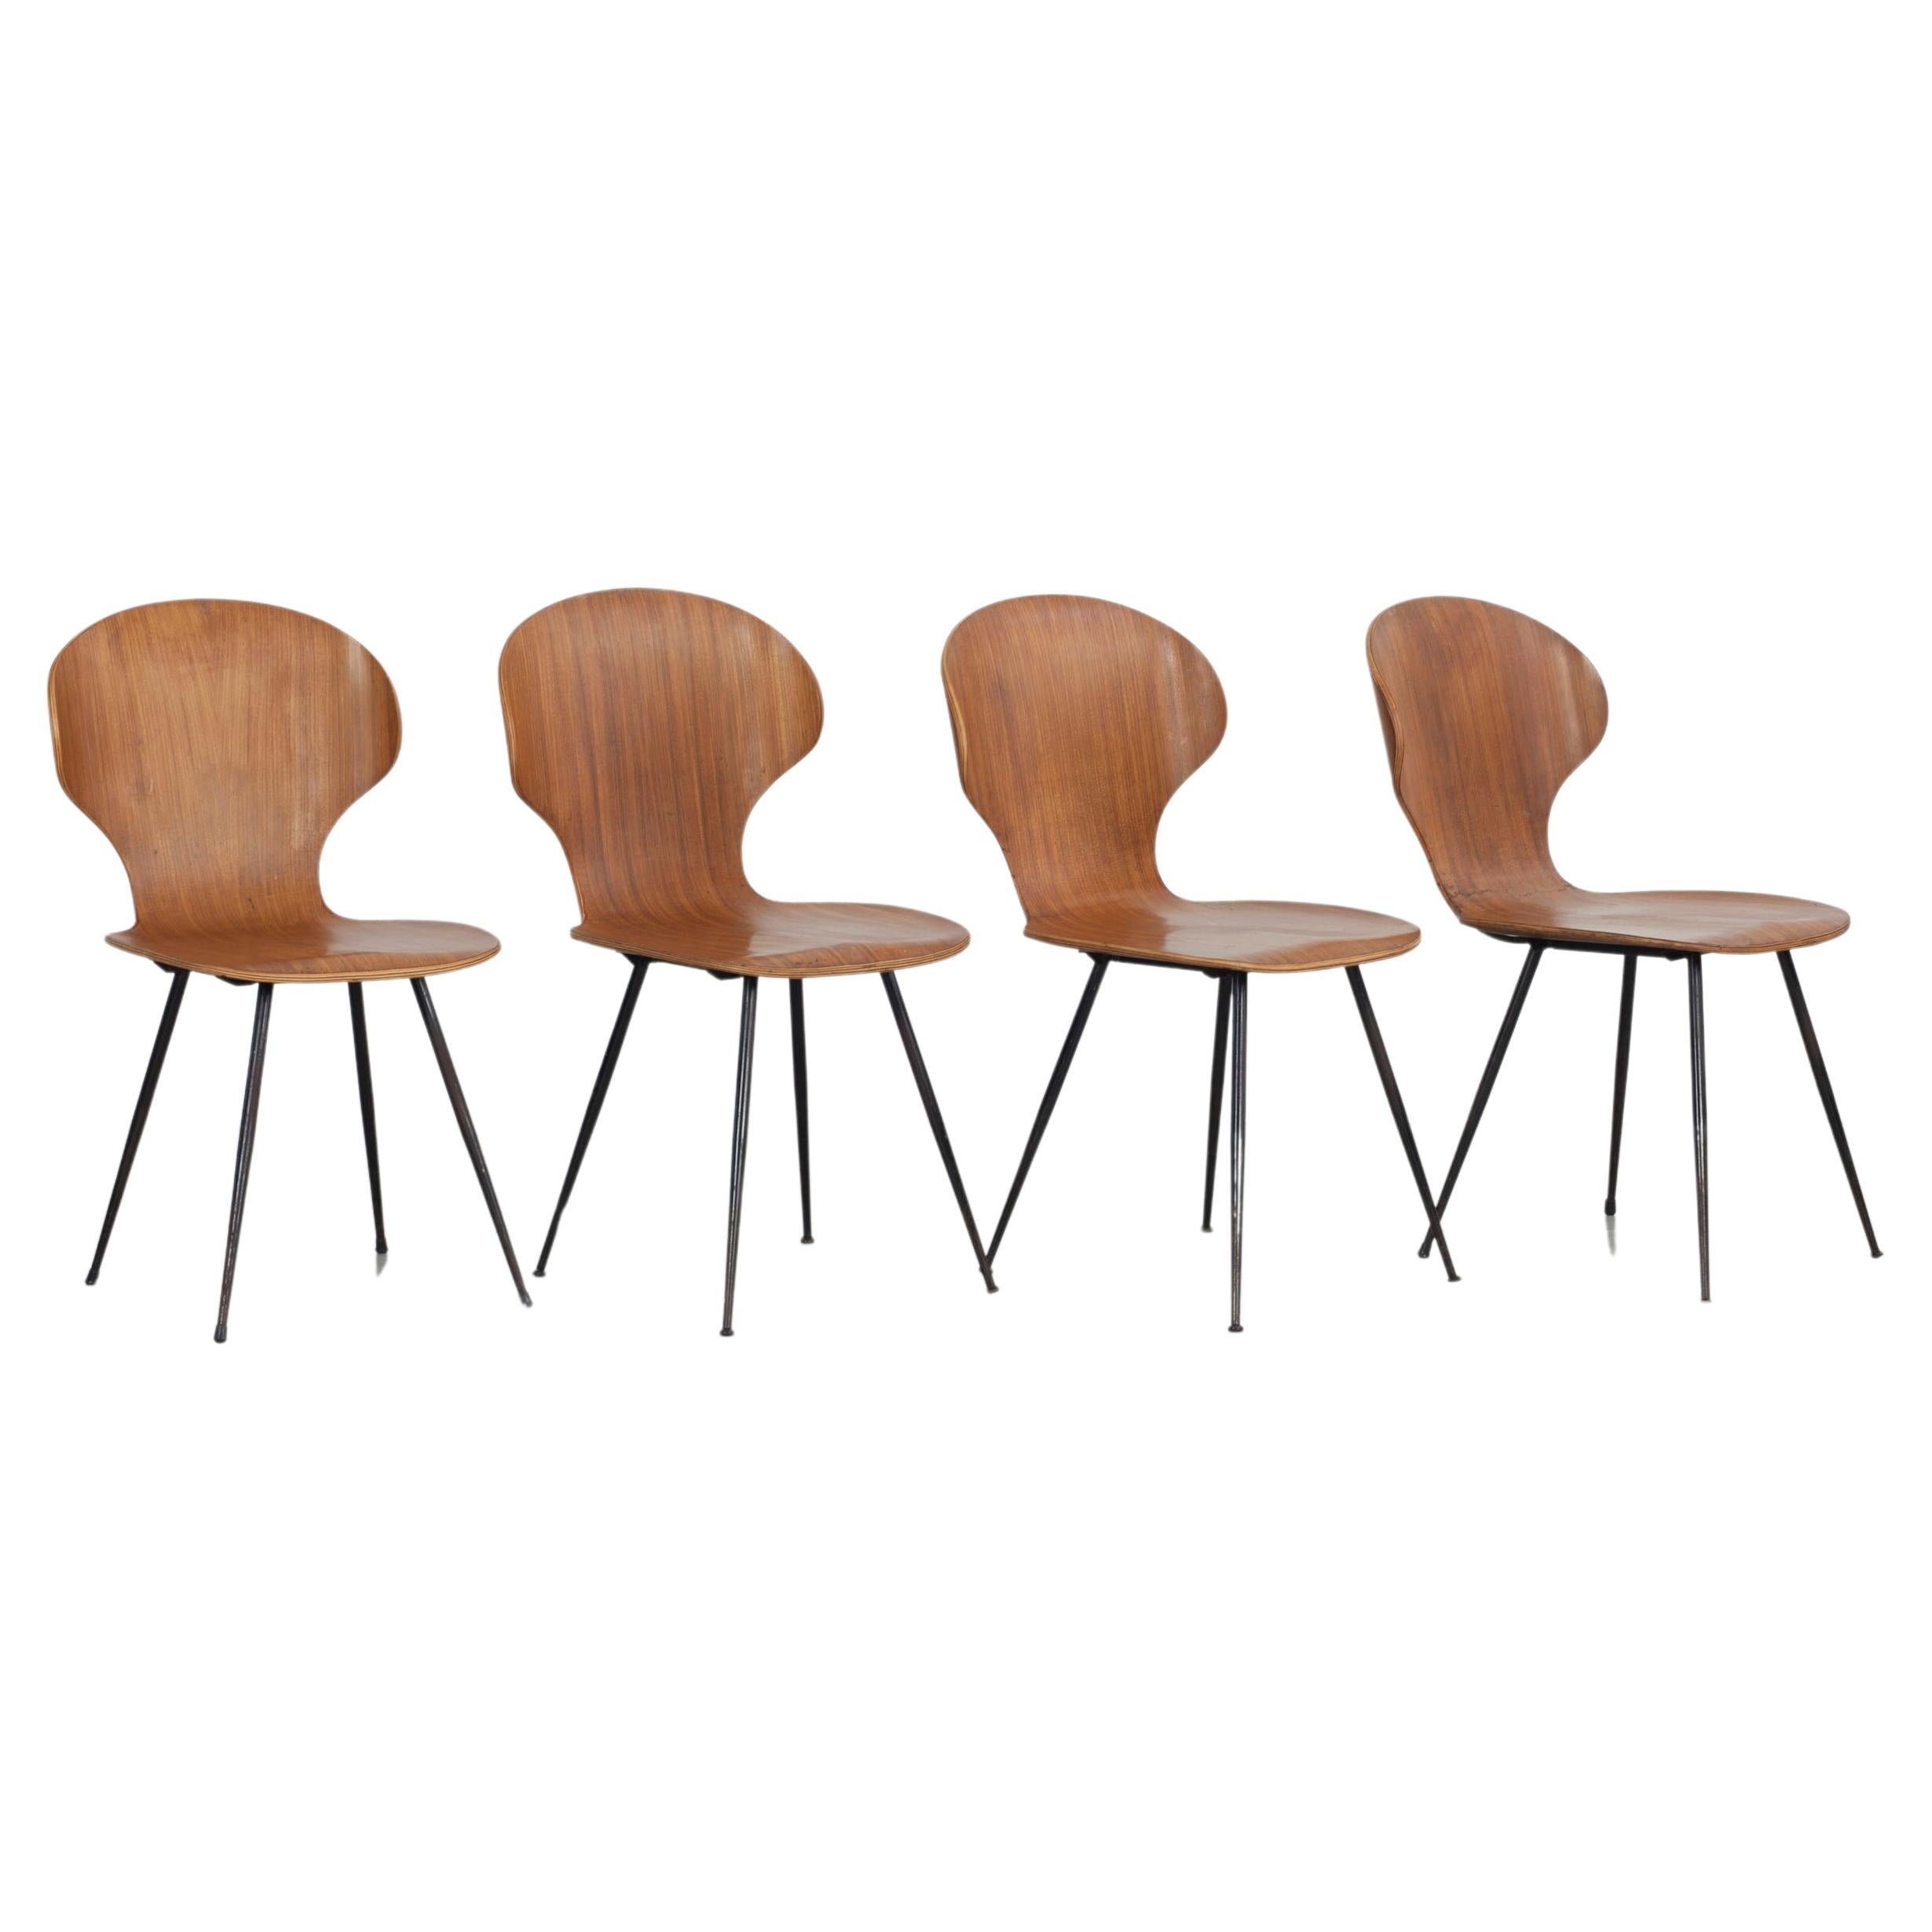 Set of 4 Bentwood chairs by Carlo Ratti, Industria Legni Curvati, Italy  1950s.